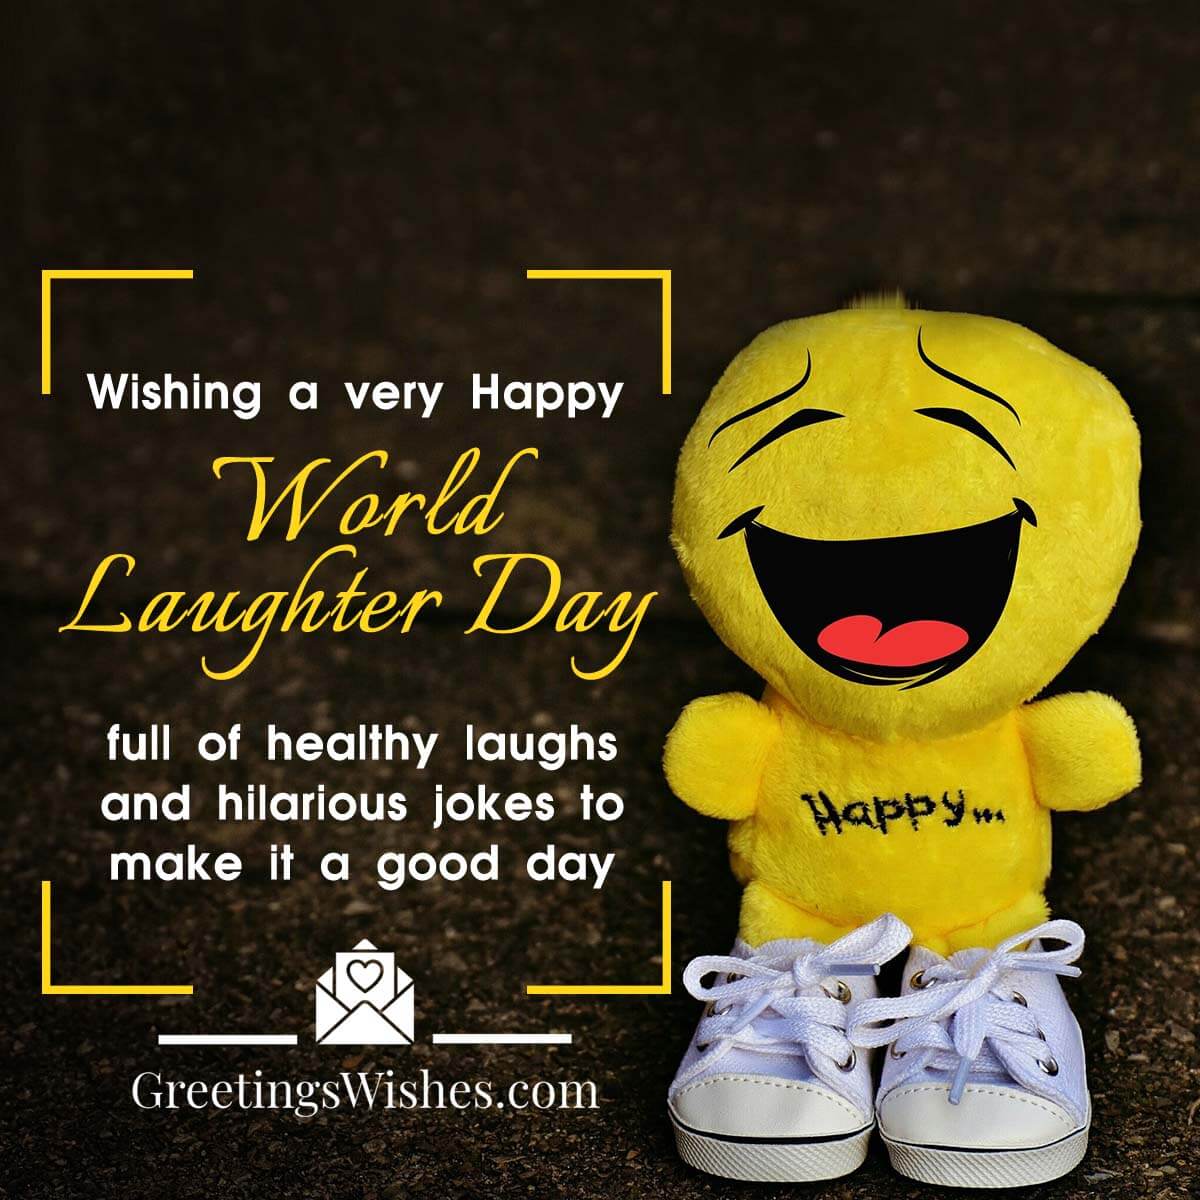 Happy Laughter Day